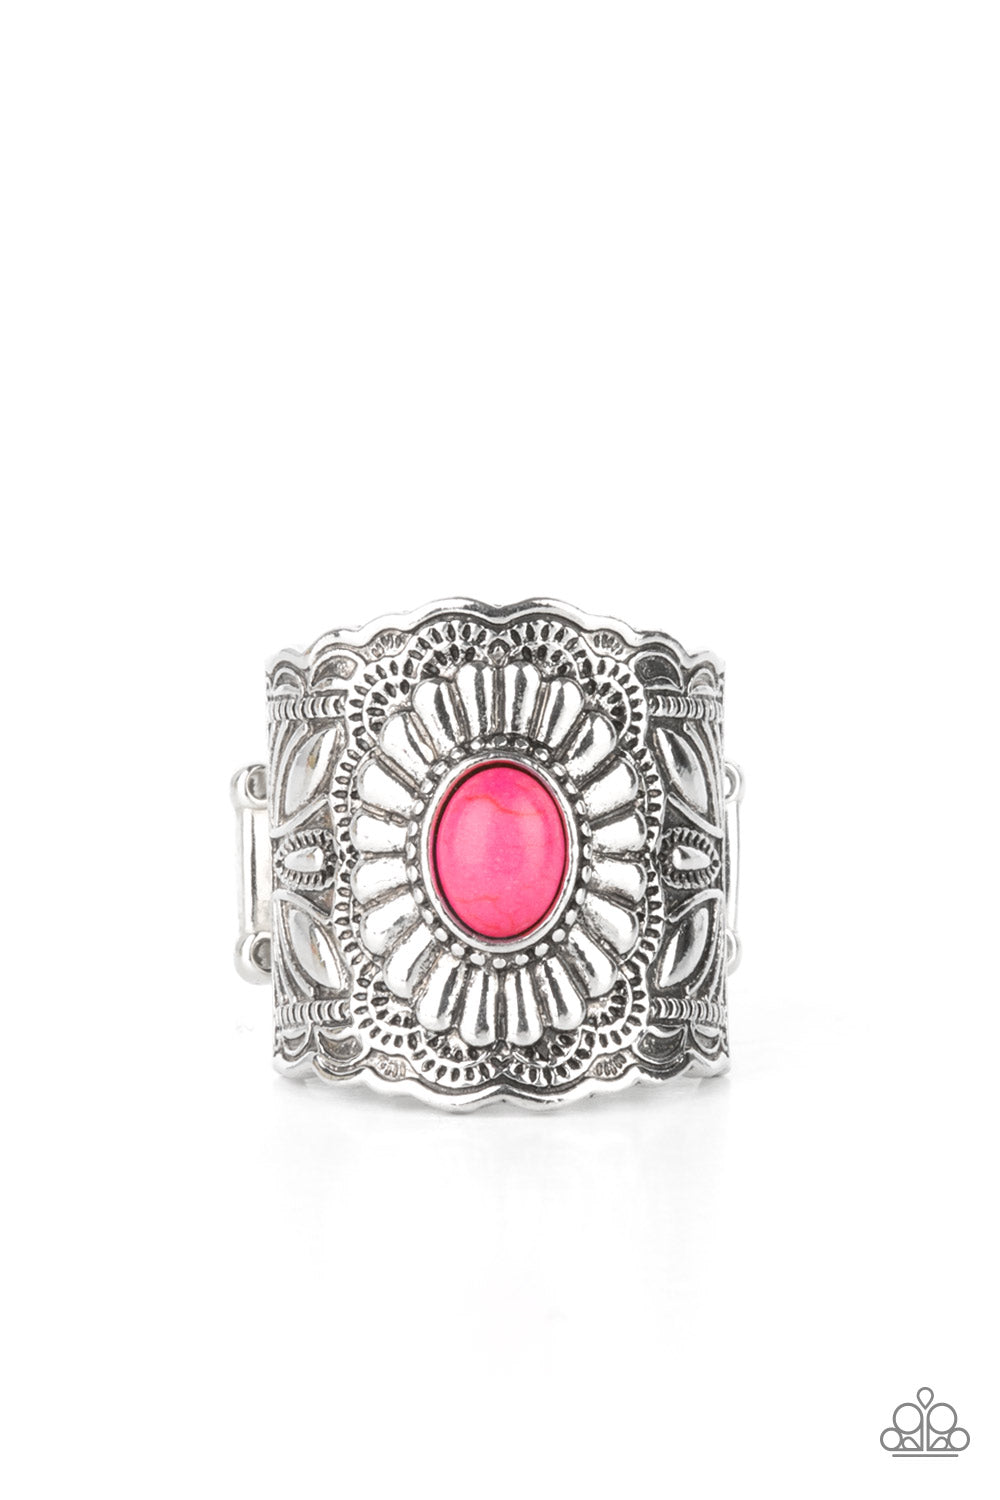 Exquisitely Ornamental Pink Ring - Paparazzi Accessories  An exquisitely ornate silver band featuring engraved floral motifs is punctuated by a bright pink oval stone creating an elegant centerpiece atop the finger. Features a stretchy band for a flexible fit.  All Paparazzi Accessories are lead free and nickel free!  Sold as one individual ring.